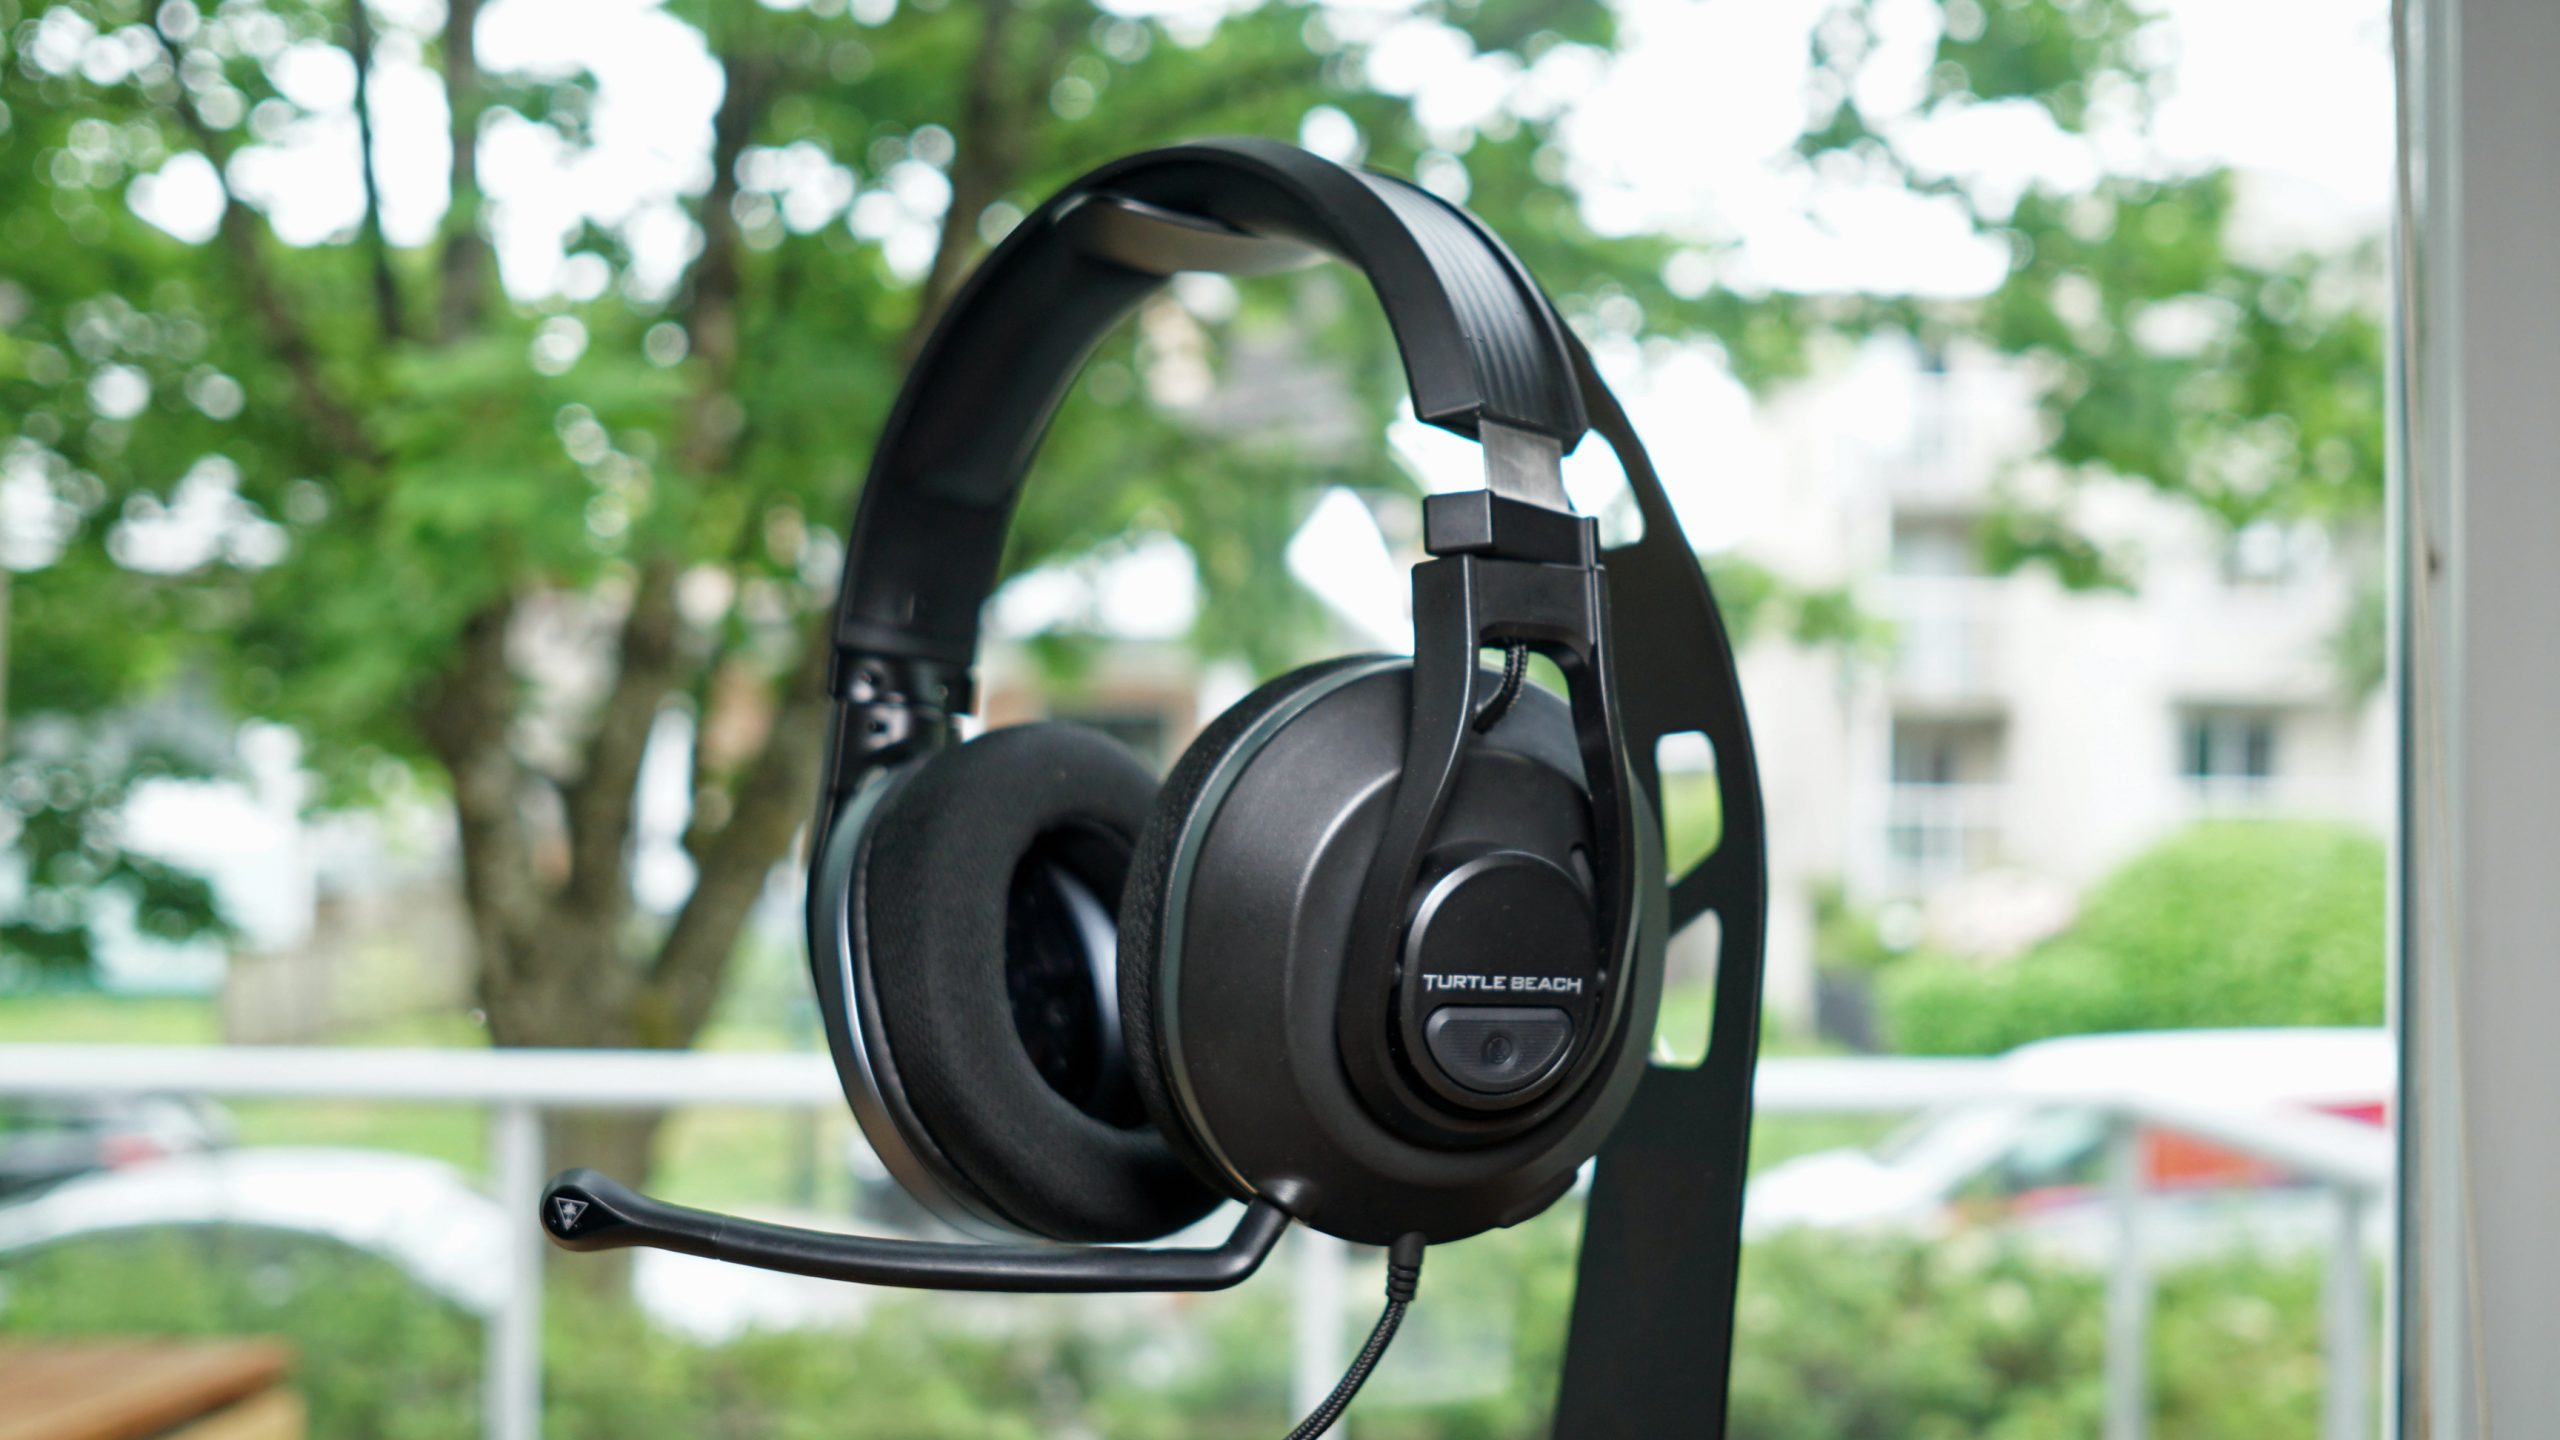 The Turtle Beach Recon 500 sits on a headphone stand in front of a window